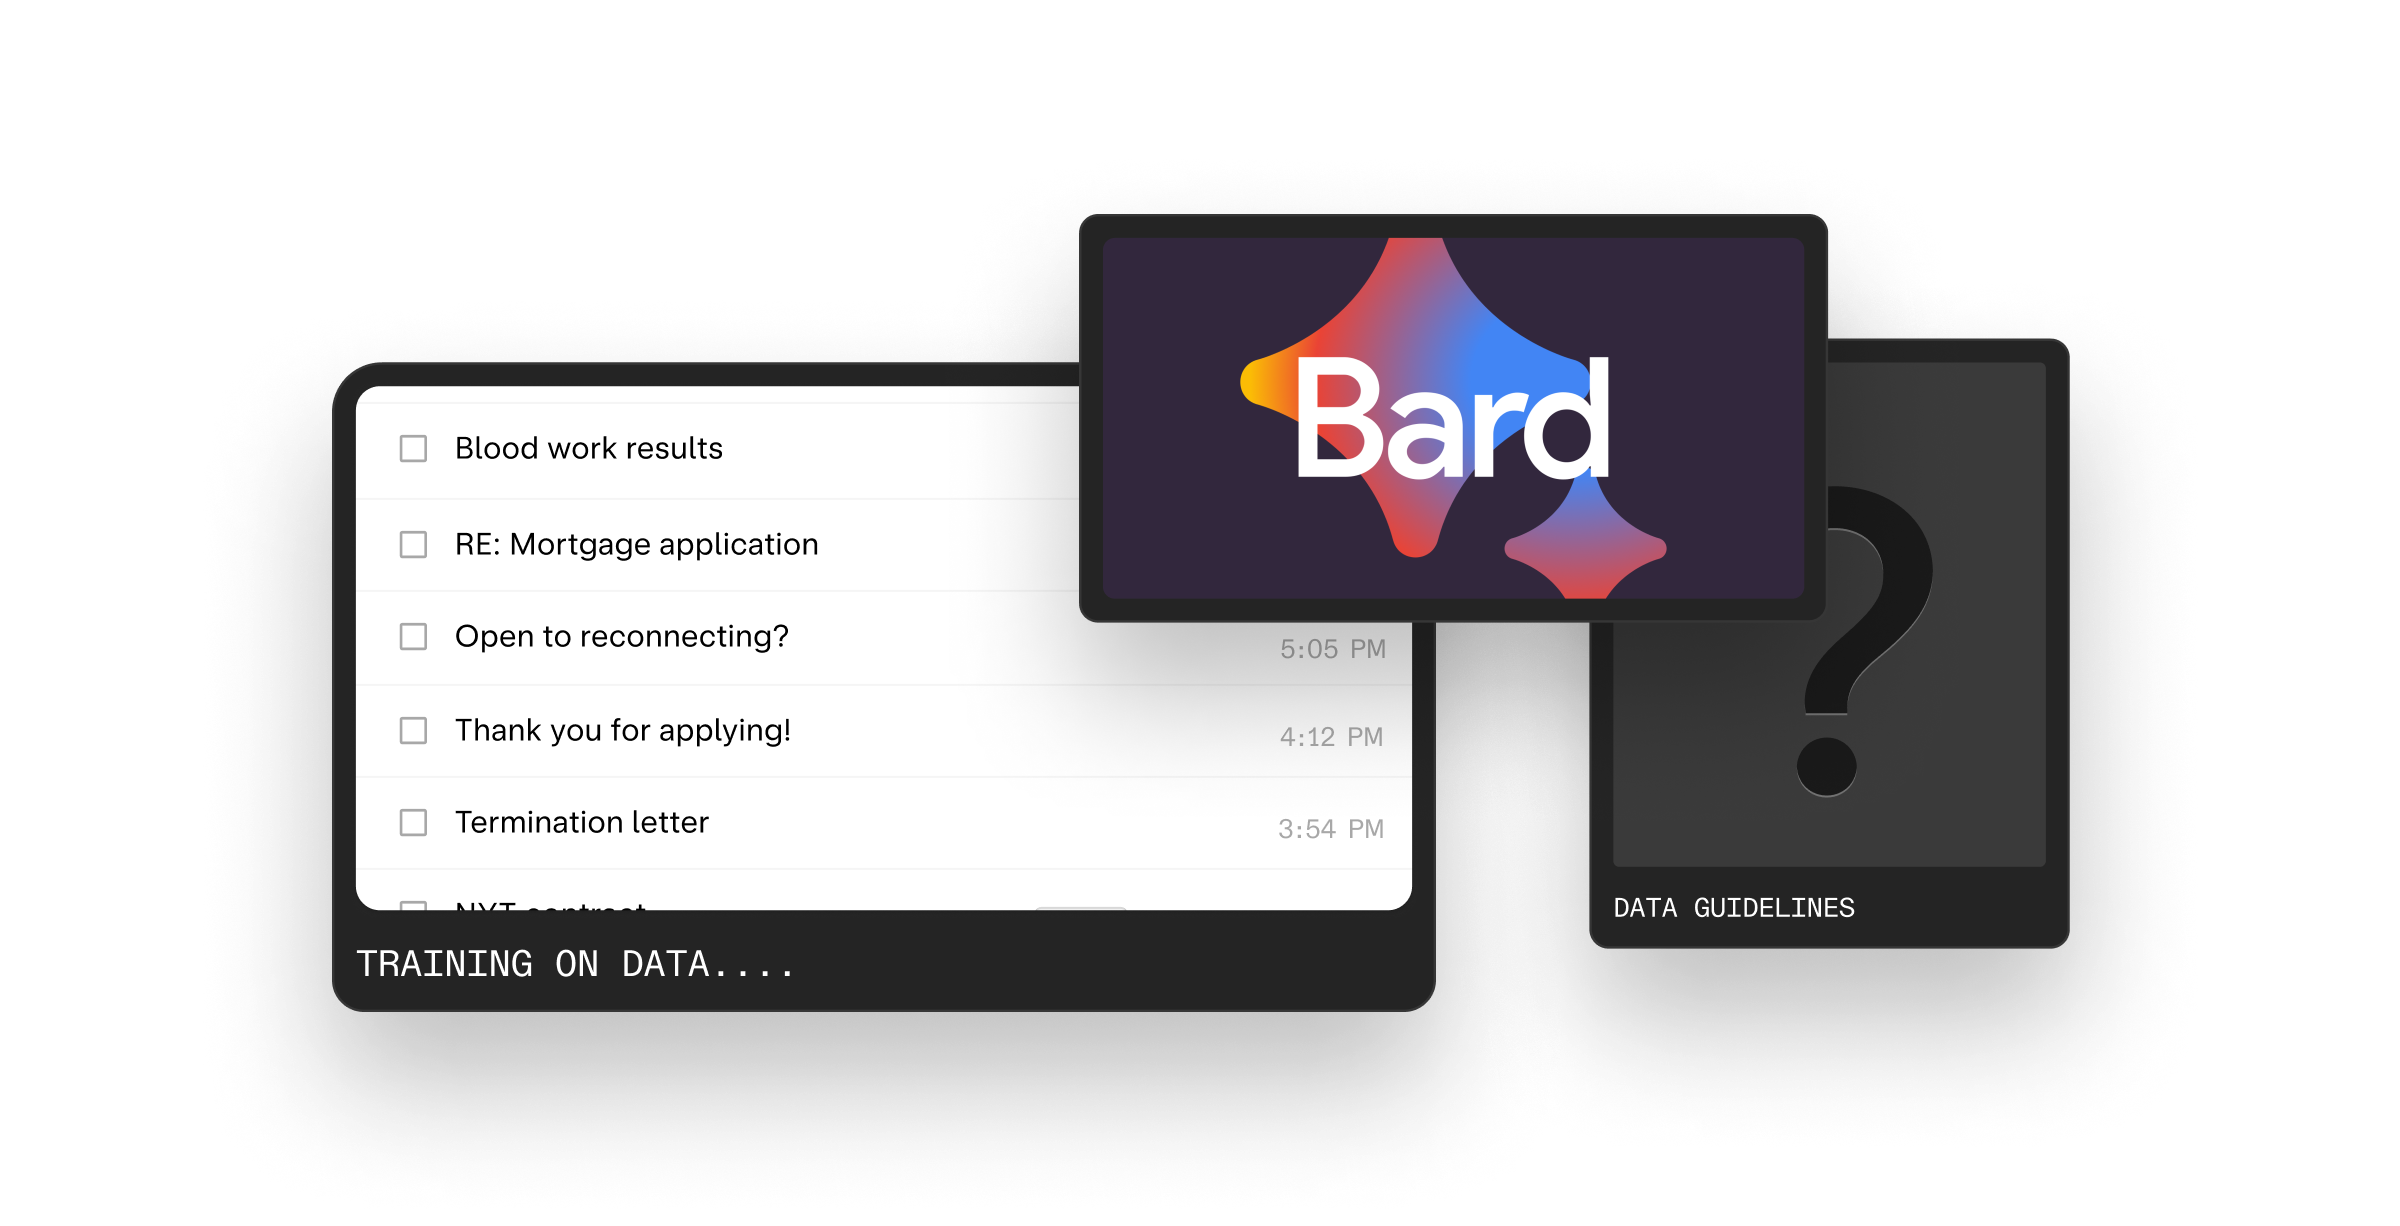 Email inbox and Bard model.